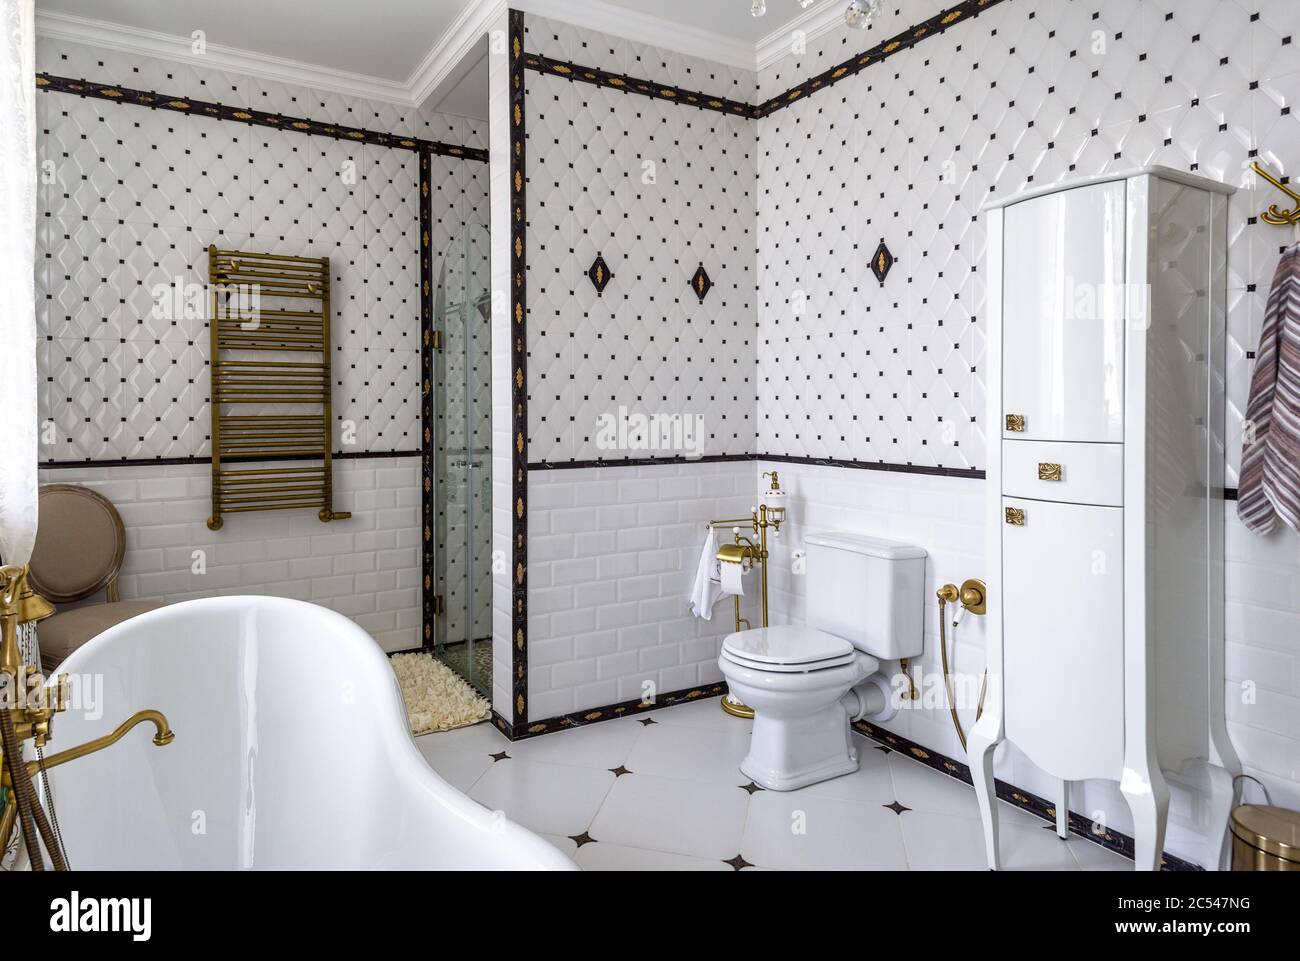 Moscow - Aug 24, 2019: Interior of bathroom in hotel or residential house. Interior design of restroom in classic style with white tiles. Panoramic vi Stock Photo